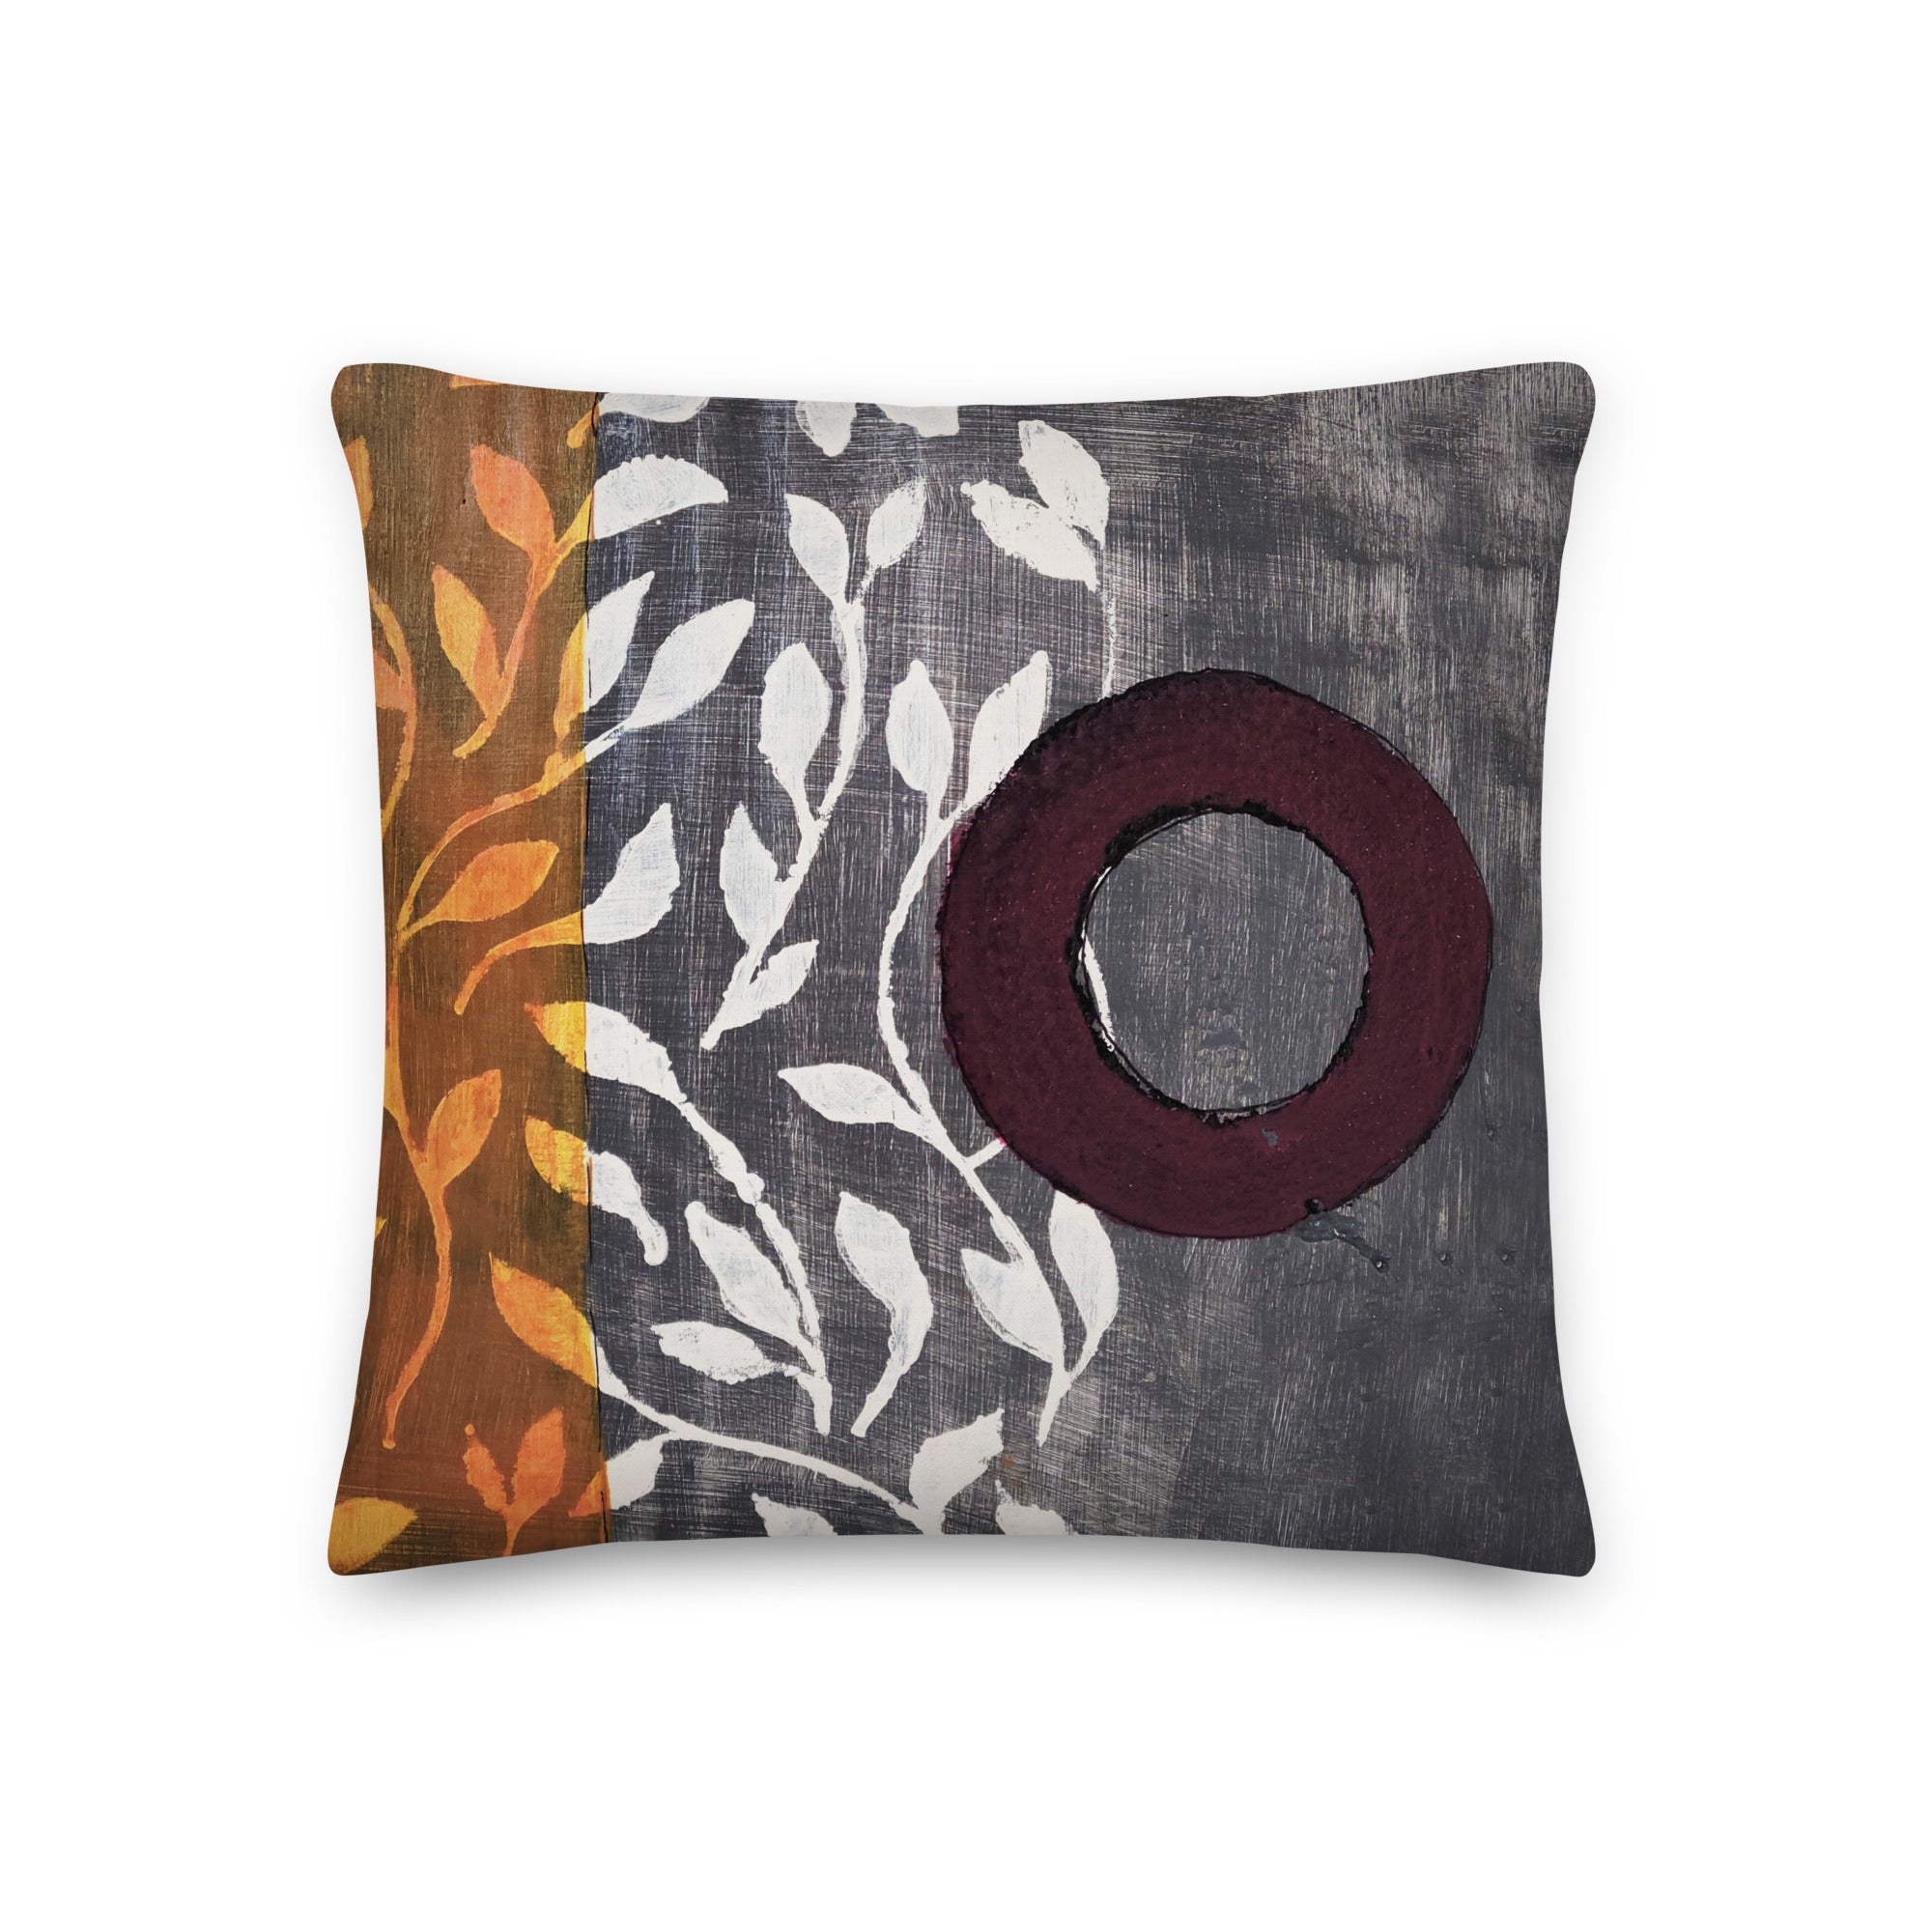 Pillow of original art. Plum circle on gray and light burnt orange background with off-white leaf design.